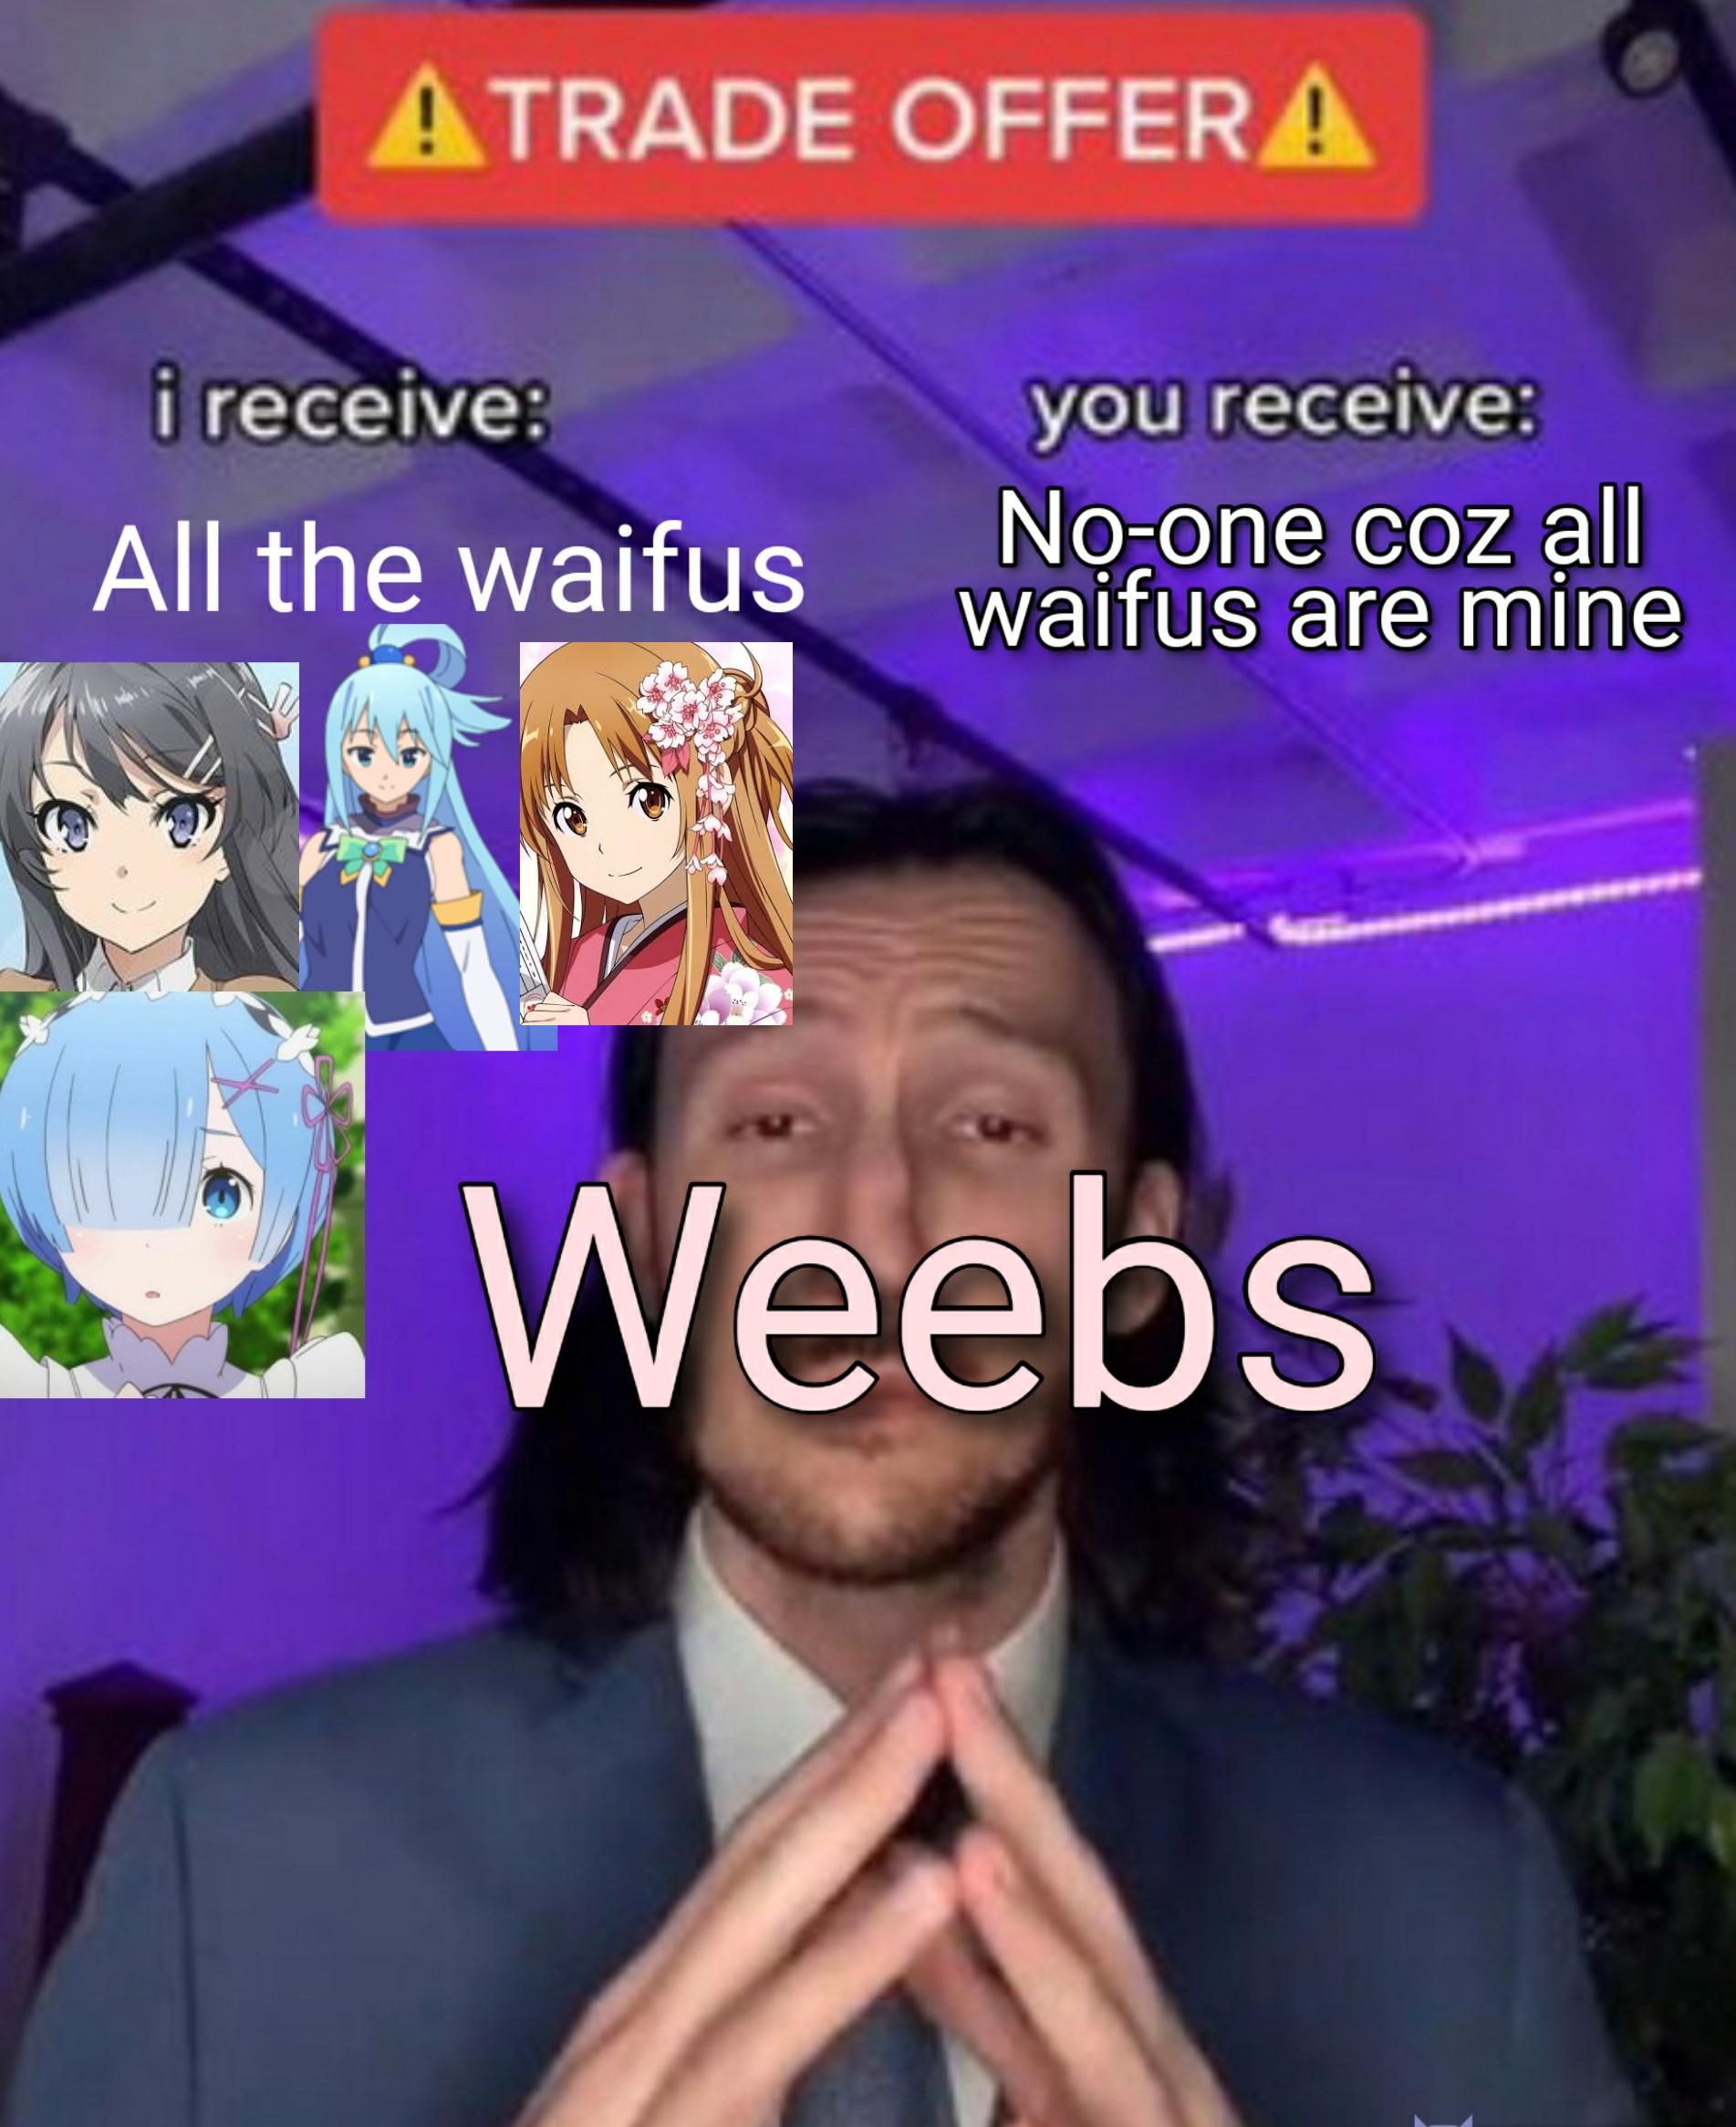 All waifus are mine now.